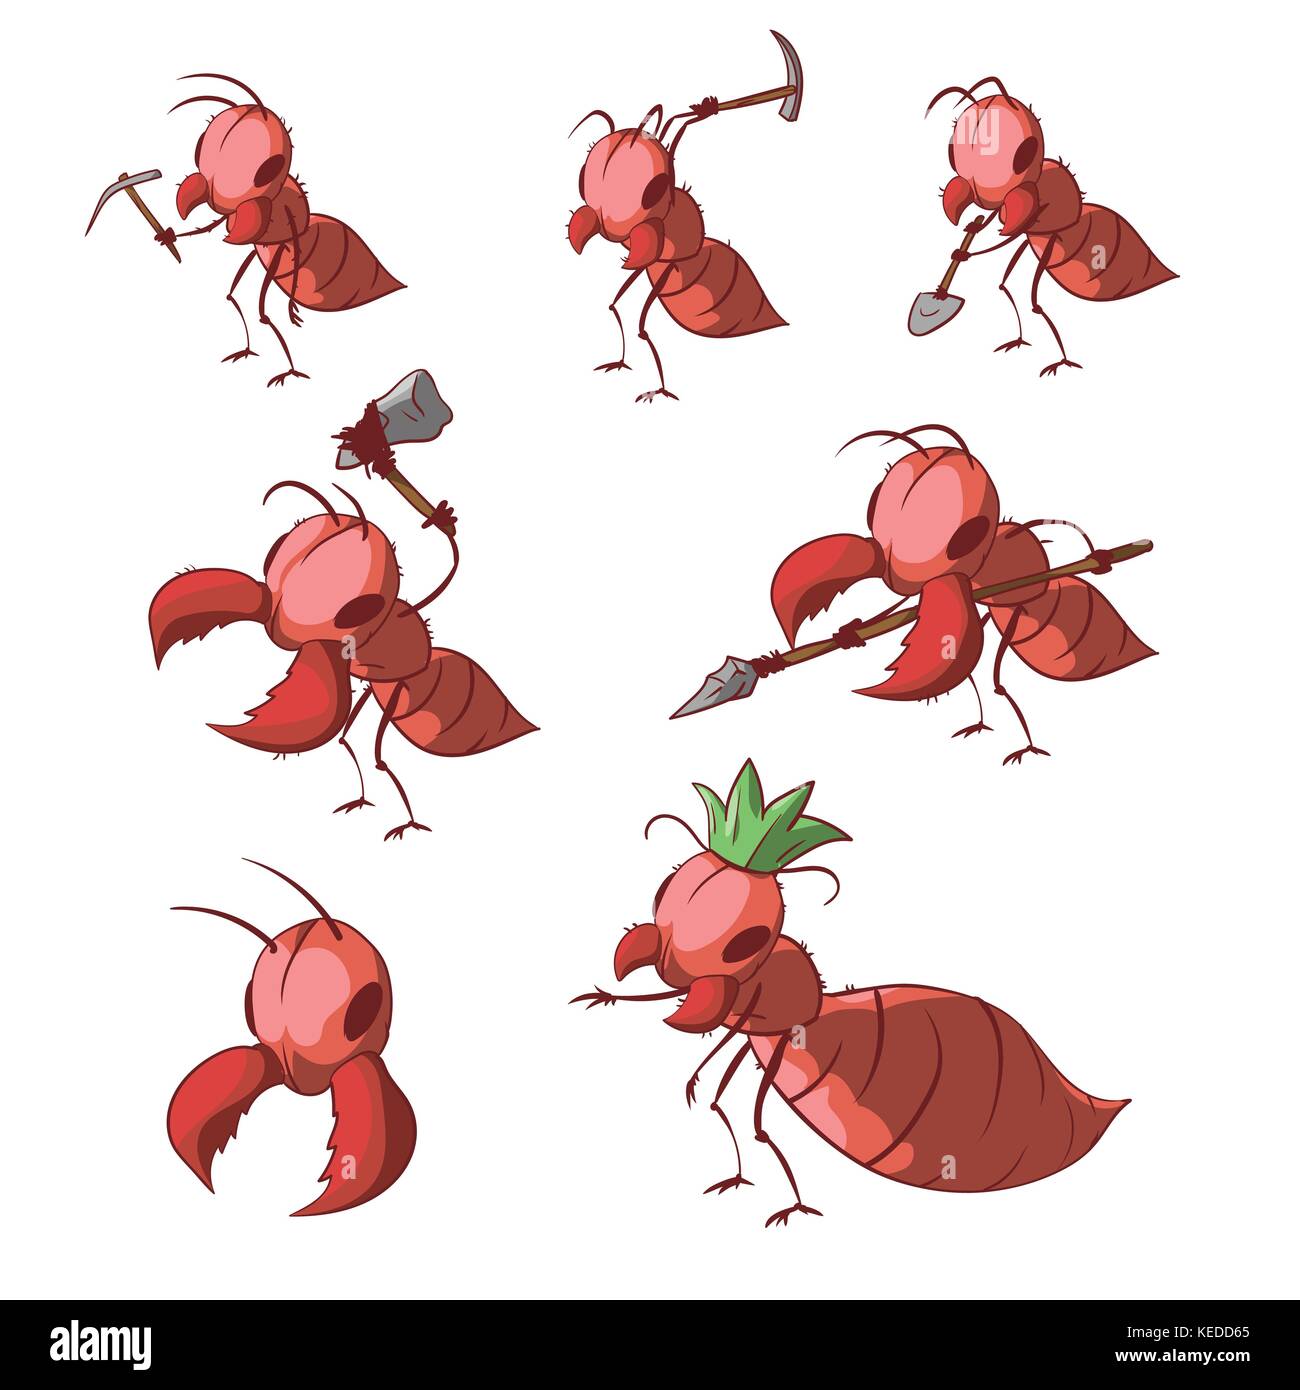 Collection of colorful vector illustrations of cartoon red ant colony Stock Vector